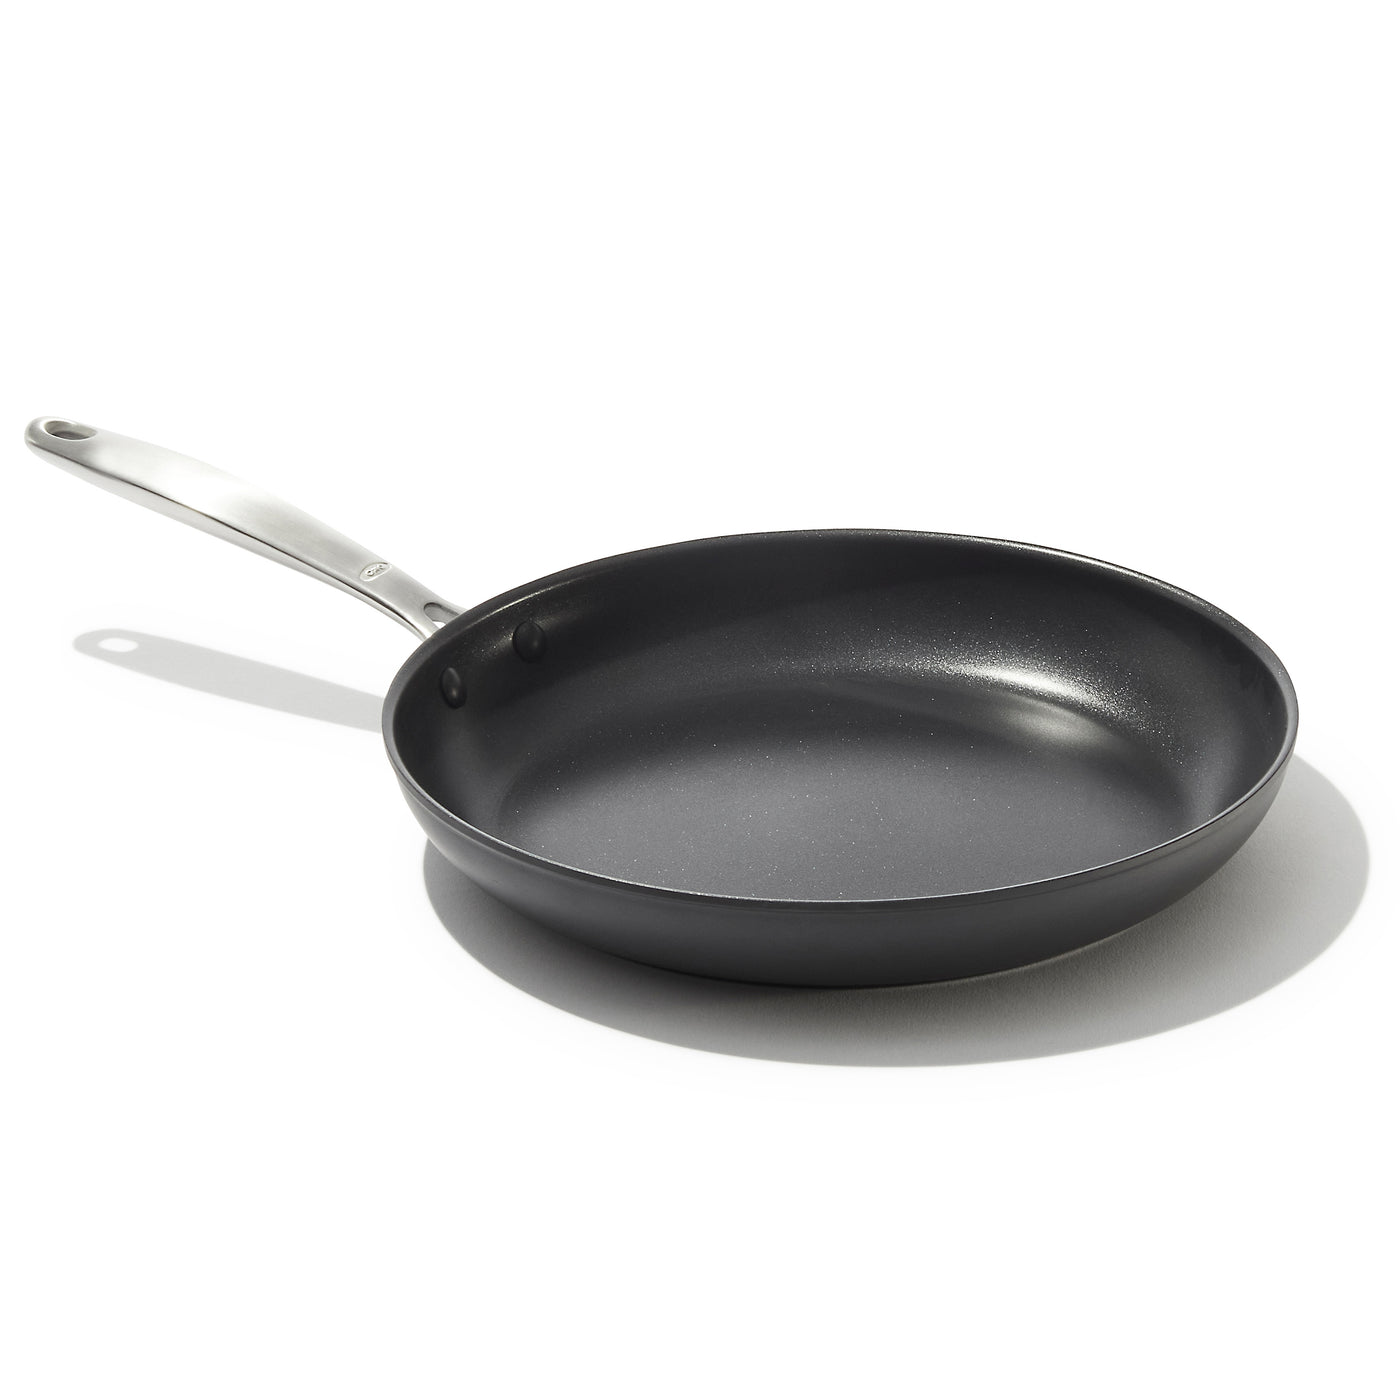 OXO Hard Anodized Nonstick Cookware, 12 Covered Frypan, Skillet 